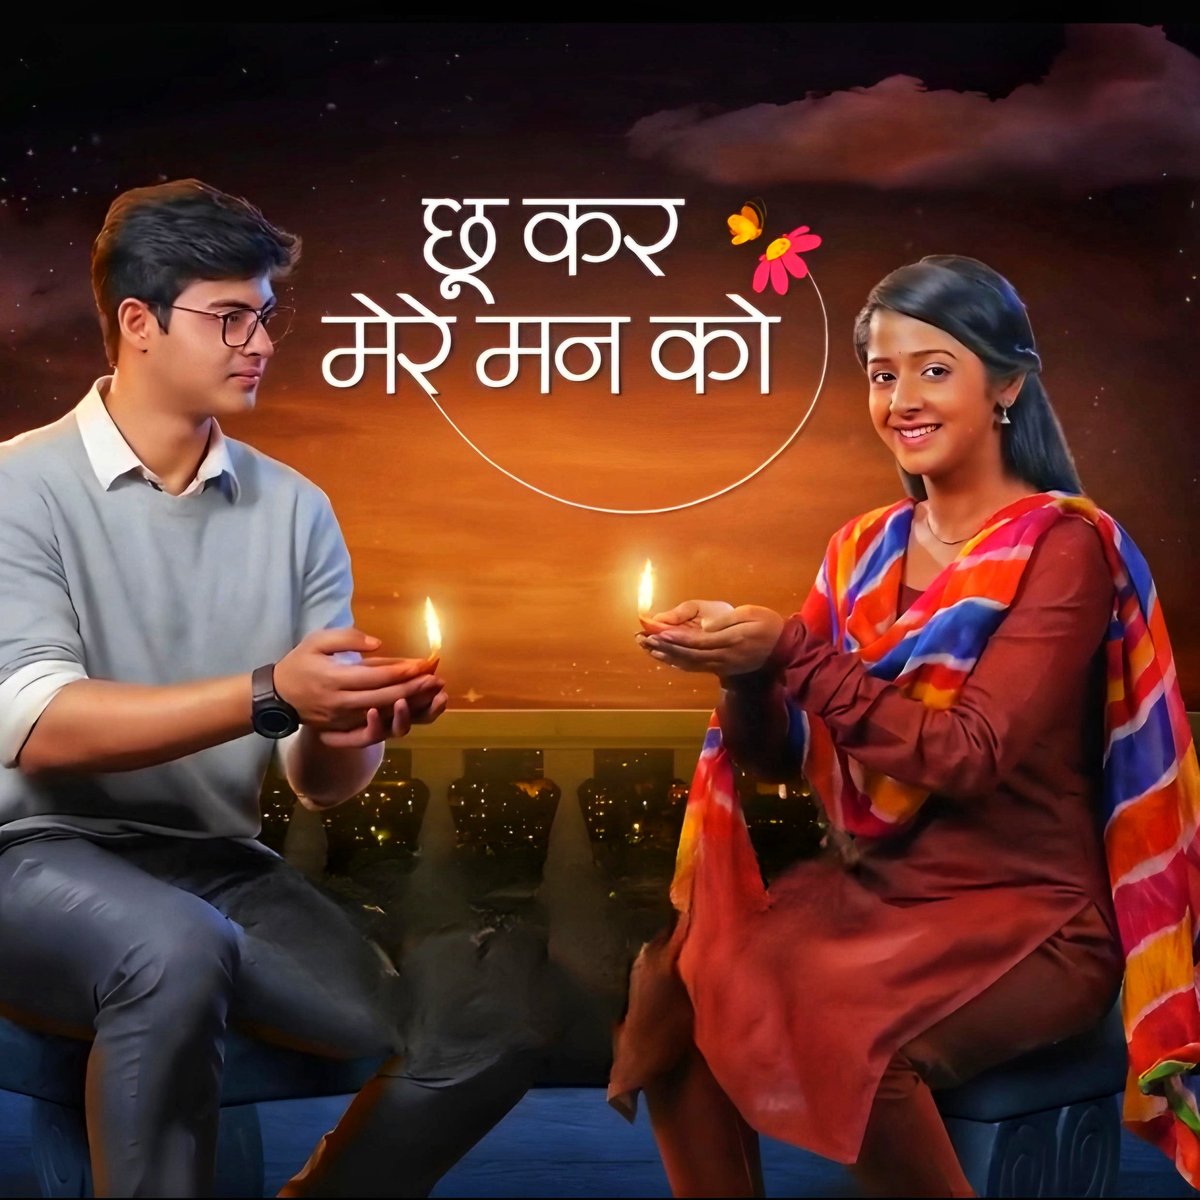 @StarPlus's Next Dubbing Show, '#ChooKarMerayMannKo' Gets Postponed For A Week, Now Launching on 25th September Onwards @ 2pm... 
Dubbed From @StarJalsha's #AnuragerChhowa